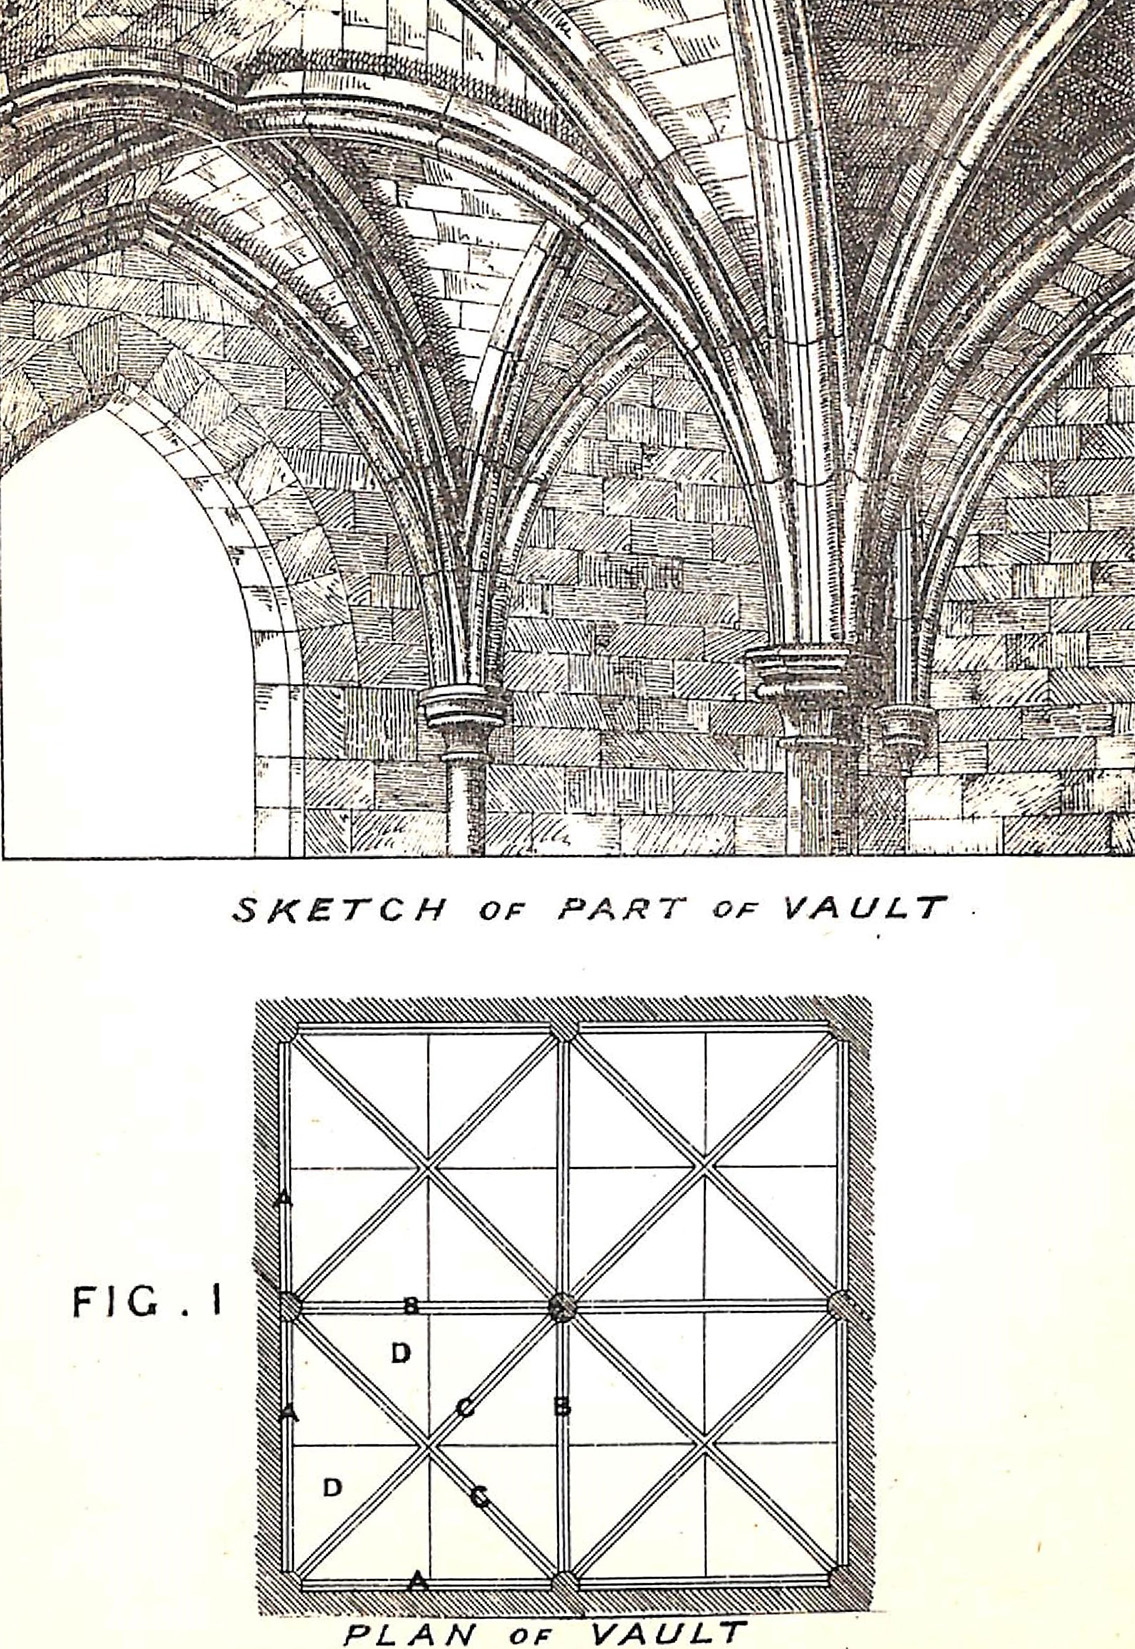 Groined Vaulting